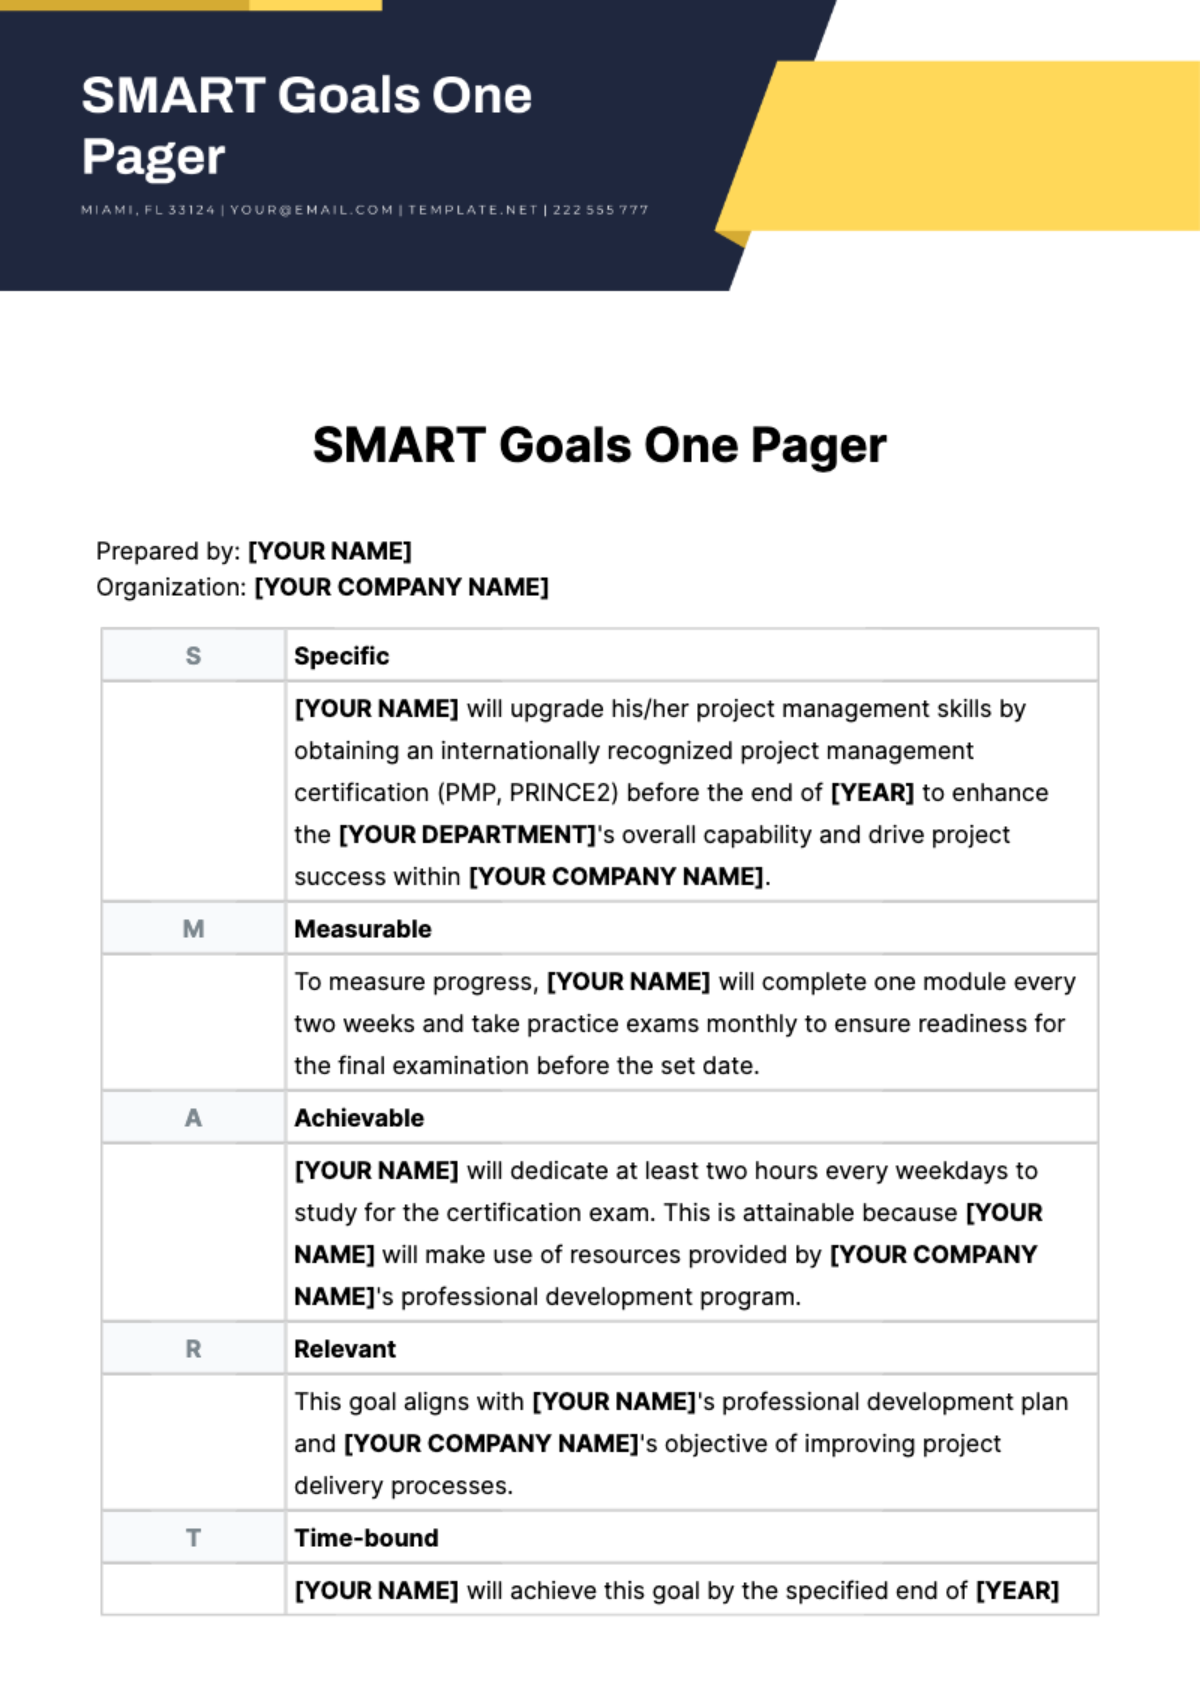 SMART Goals One Pager Template